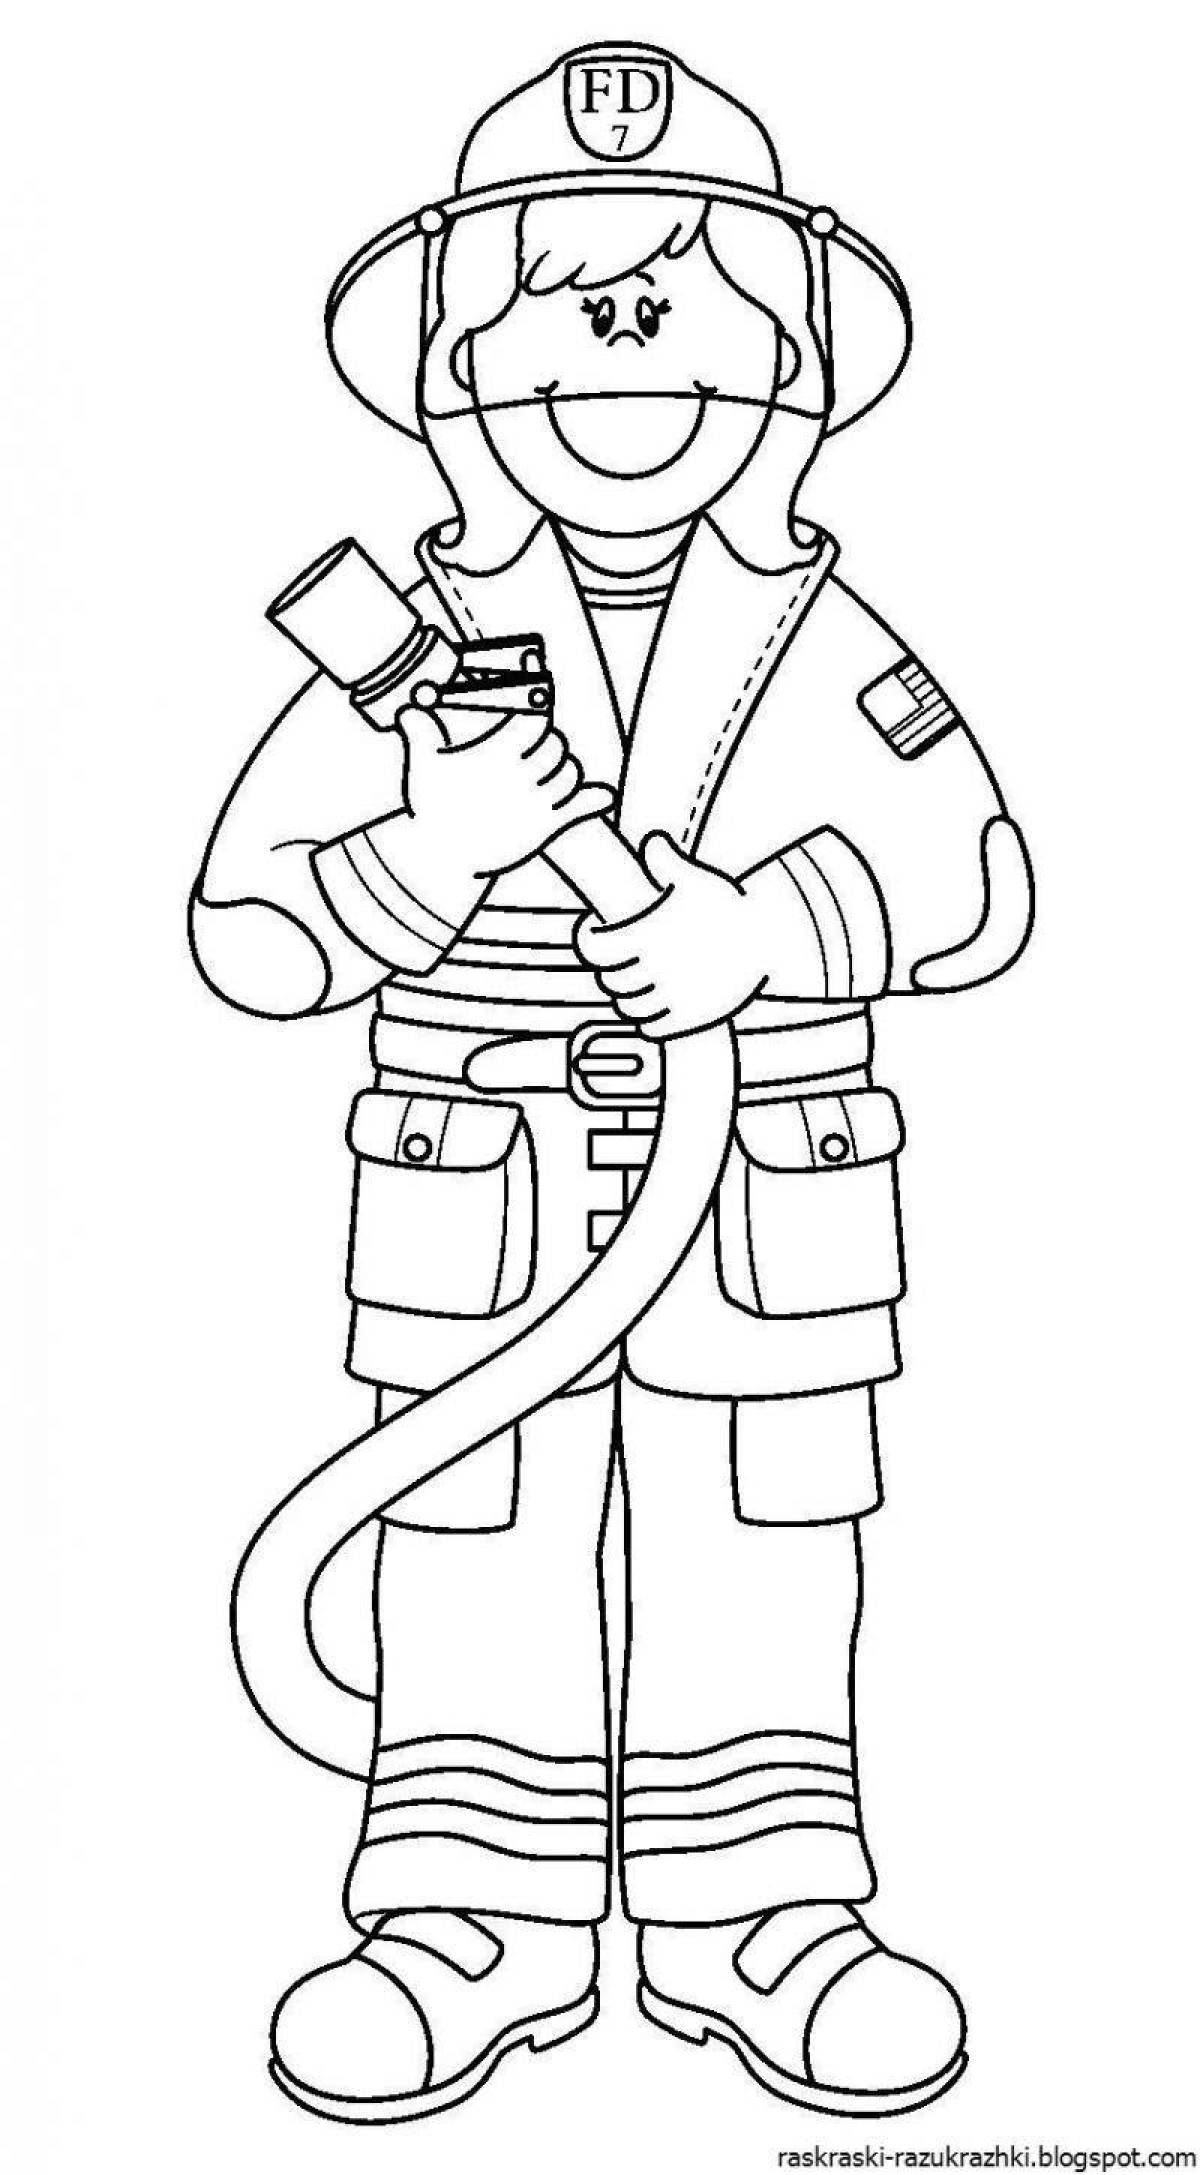 Awesome firefighter coloring pages for kids